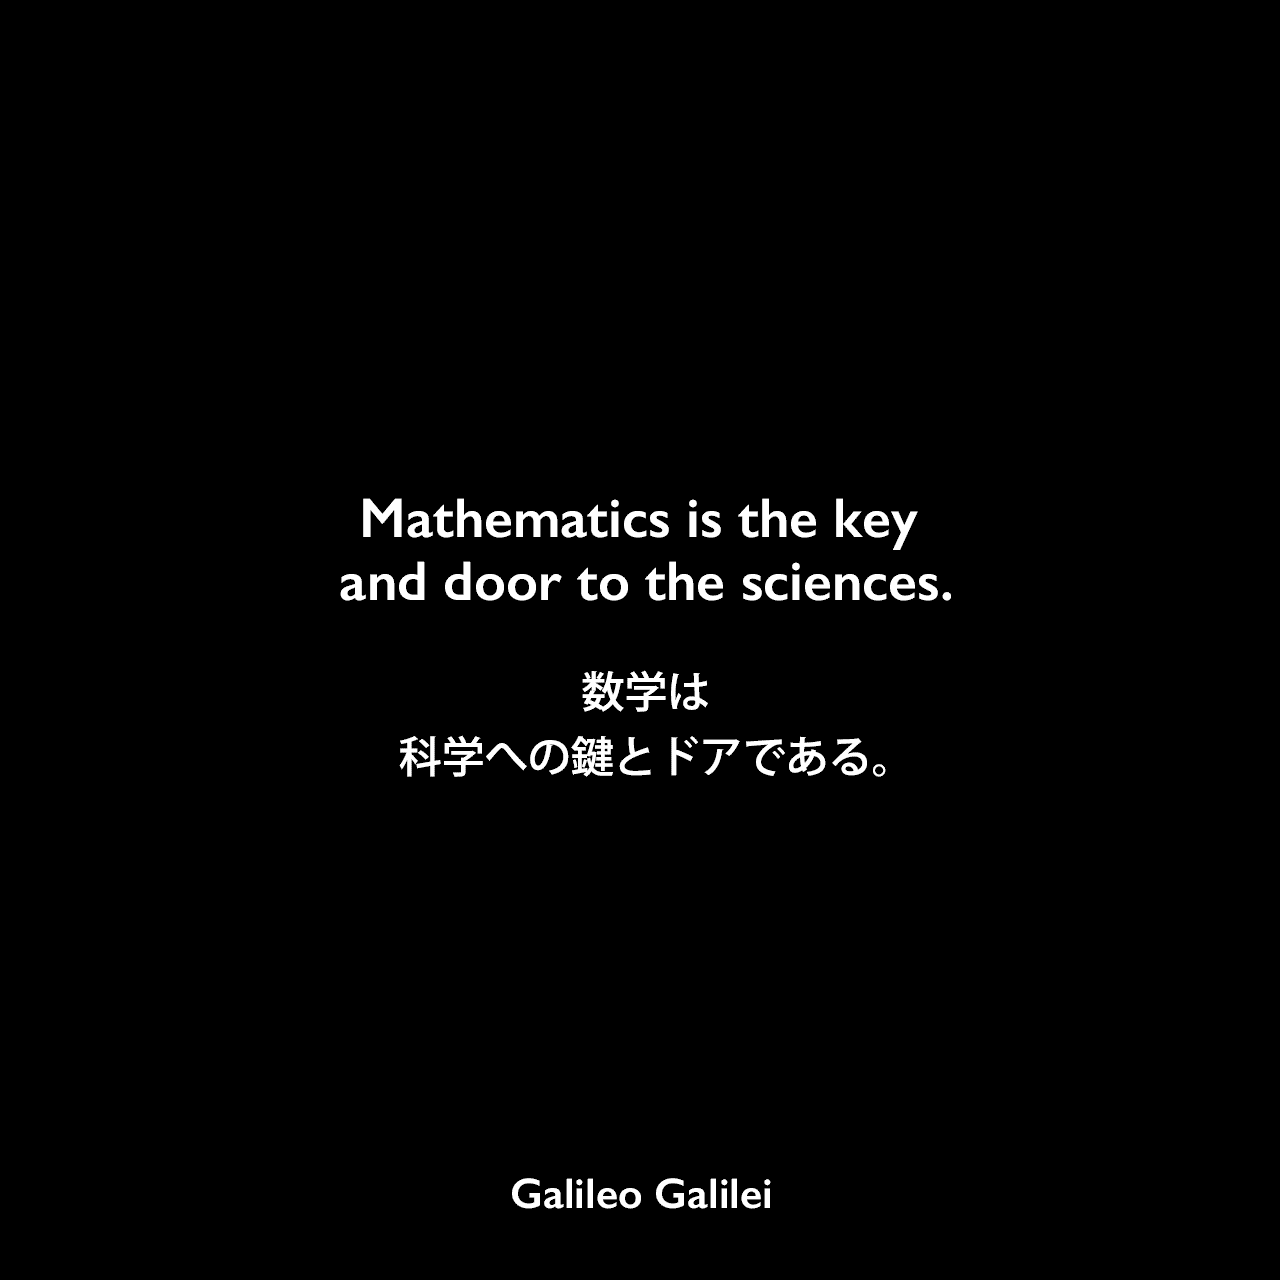 Mathematics is the key and door to the sciences.数学は、科学への鍵とドアである。Galileo Galilei